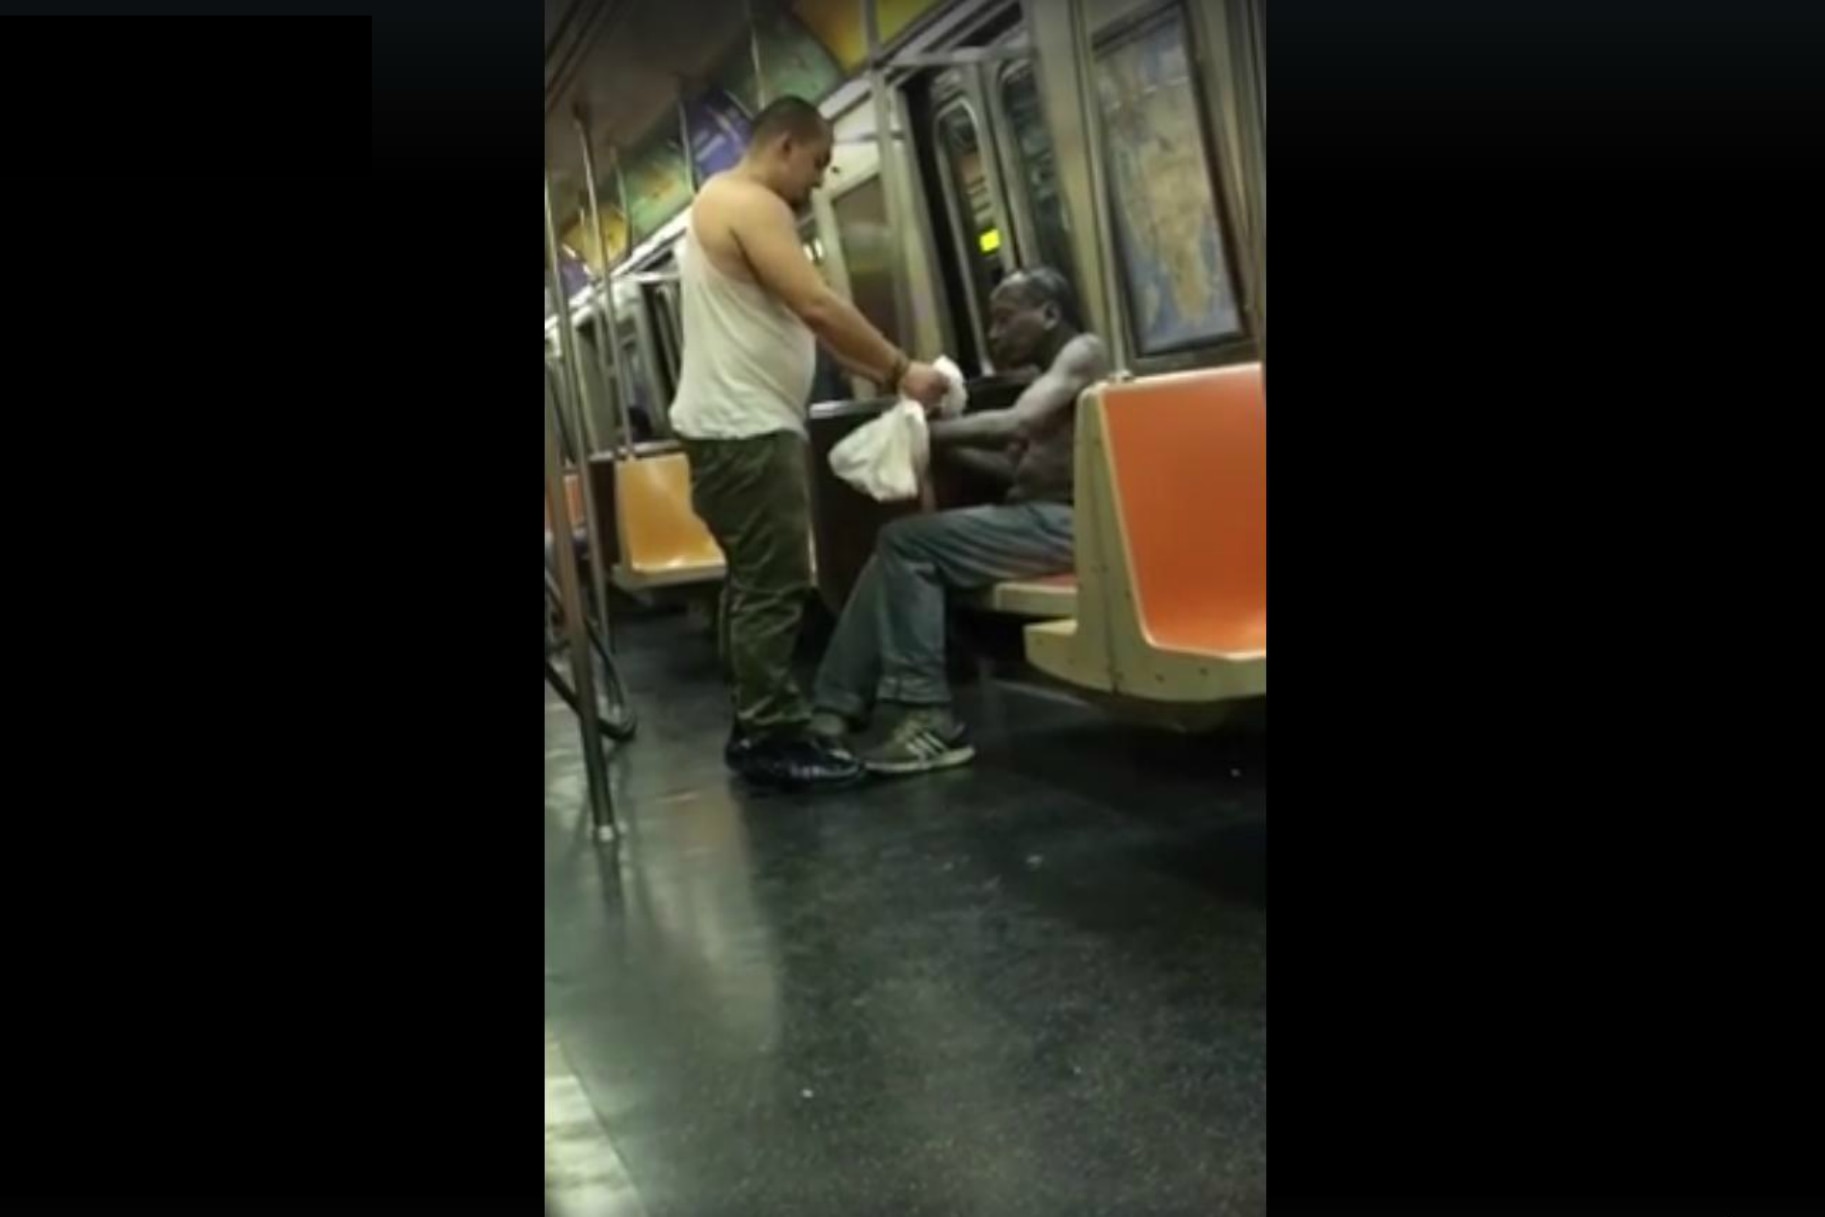 This New Yorker Gave A Homeless Man The Shirt Off His Back | Very Real